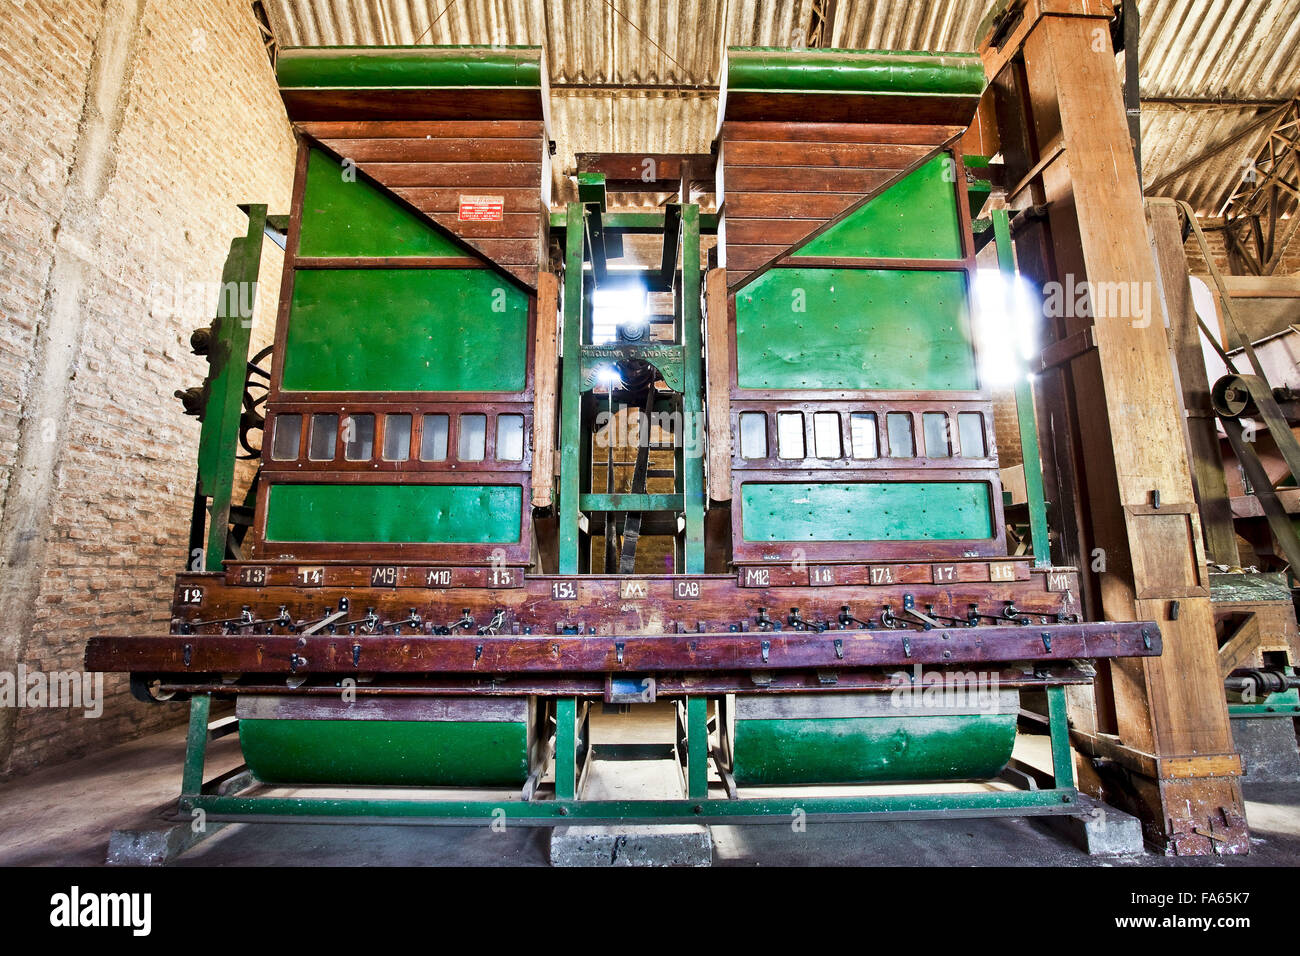 Old machine to select coffee beans that is still used on the farm Stock Photo